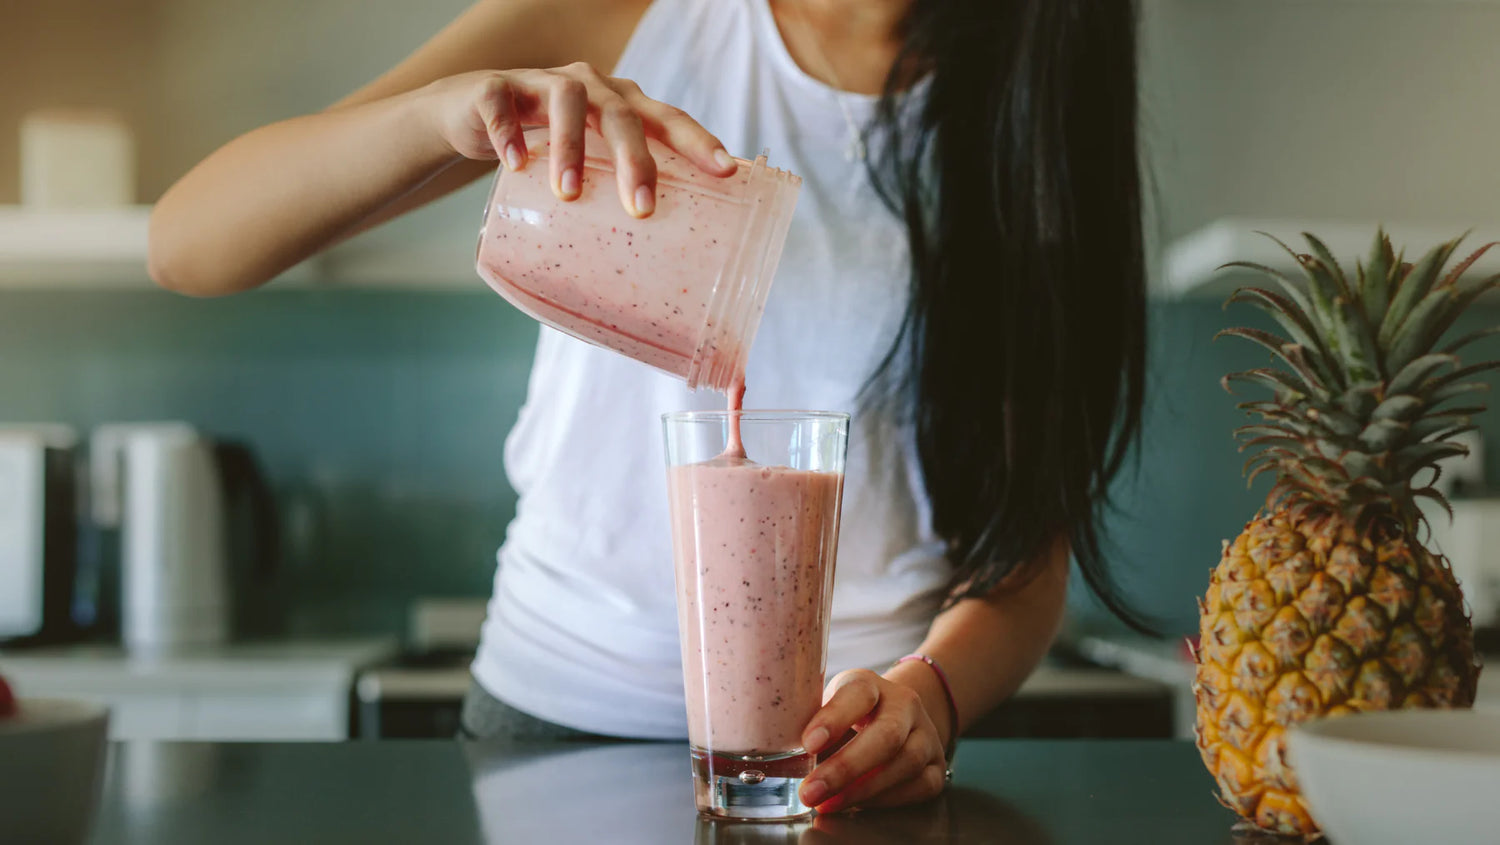 A woman pouring a pink smoothie from a blender pitcher into a glass, with a pineapple in the background, depicting the convenience of maintaining healthy eating habits through nutrient-rich smoothies.